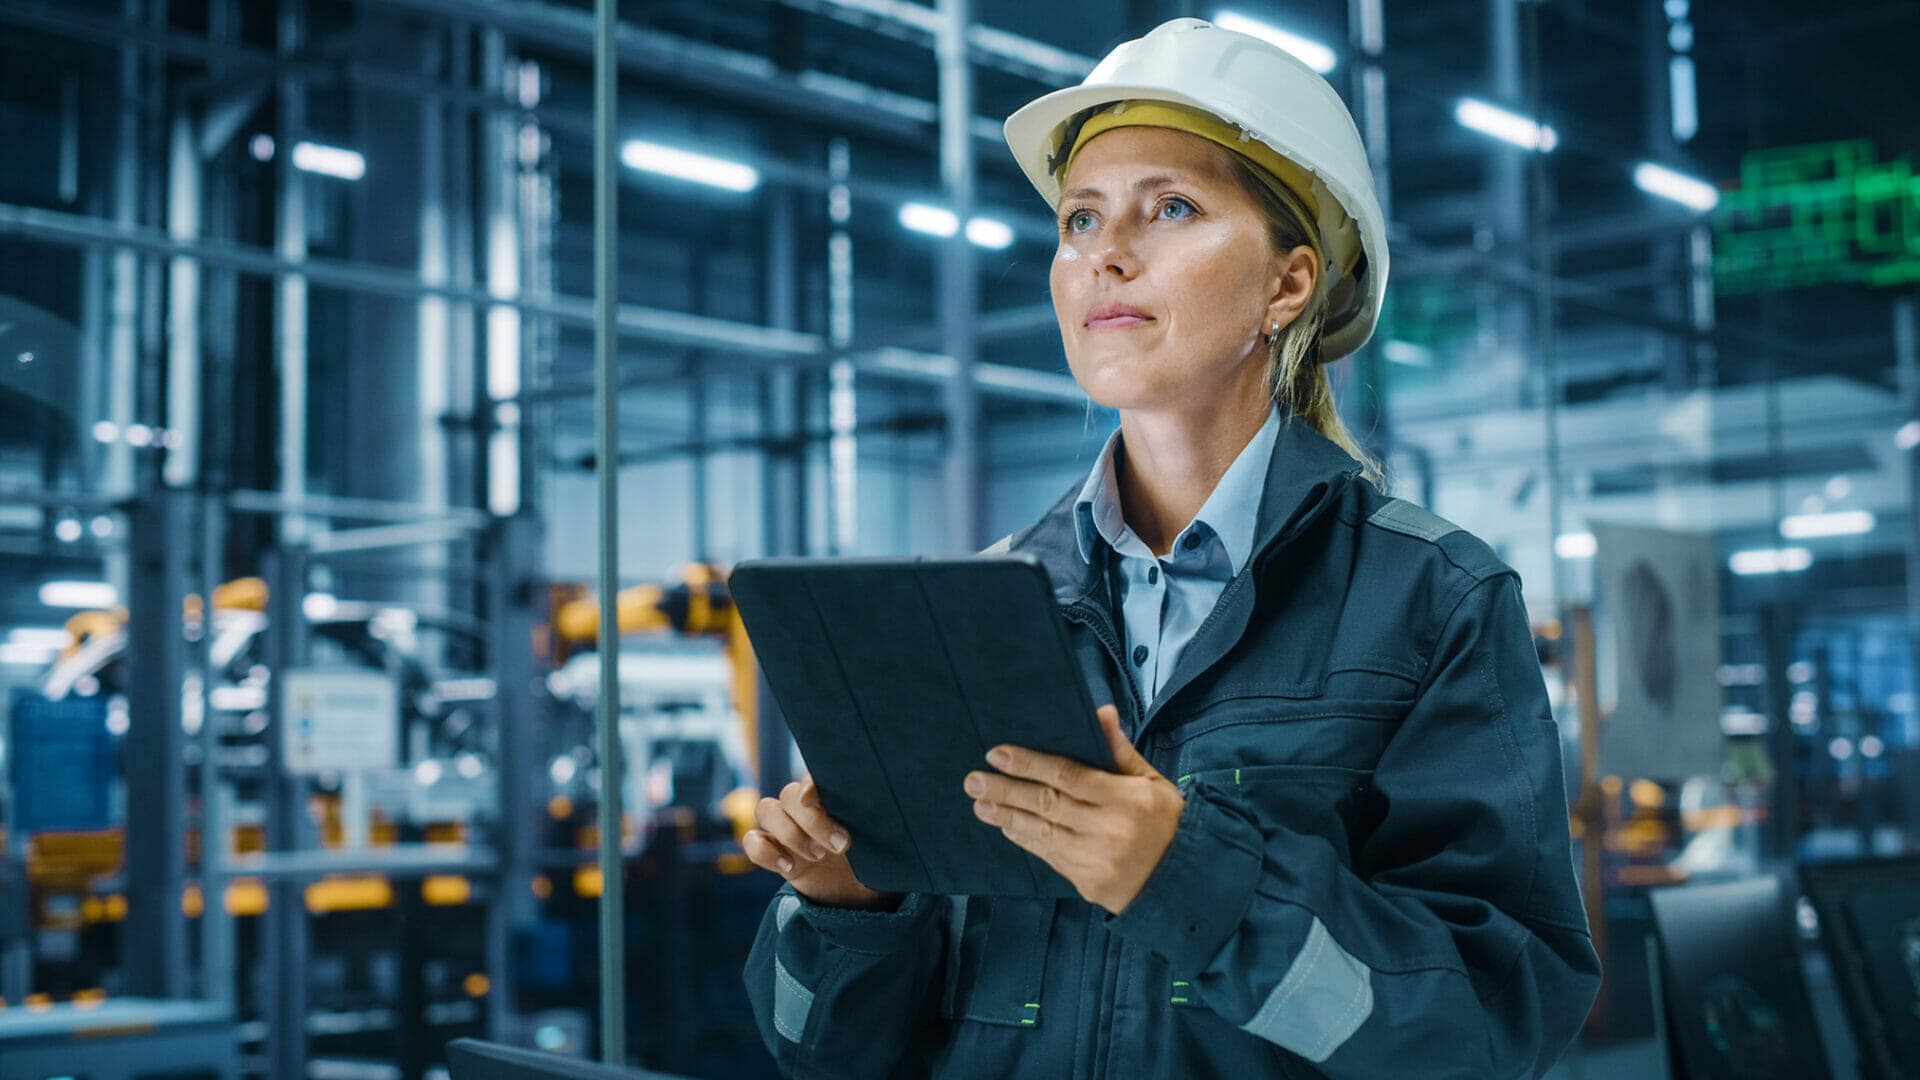 A woman in a hard hat is holding a tablet in a factory.